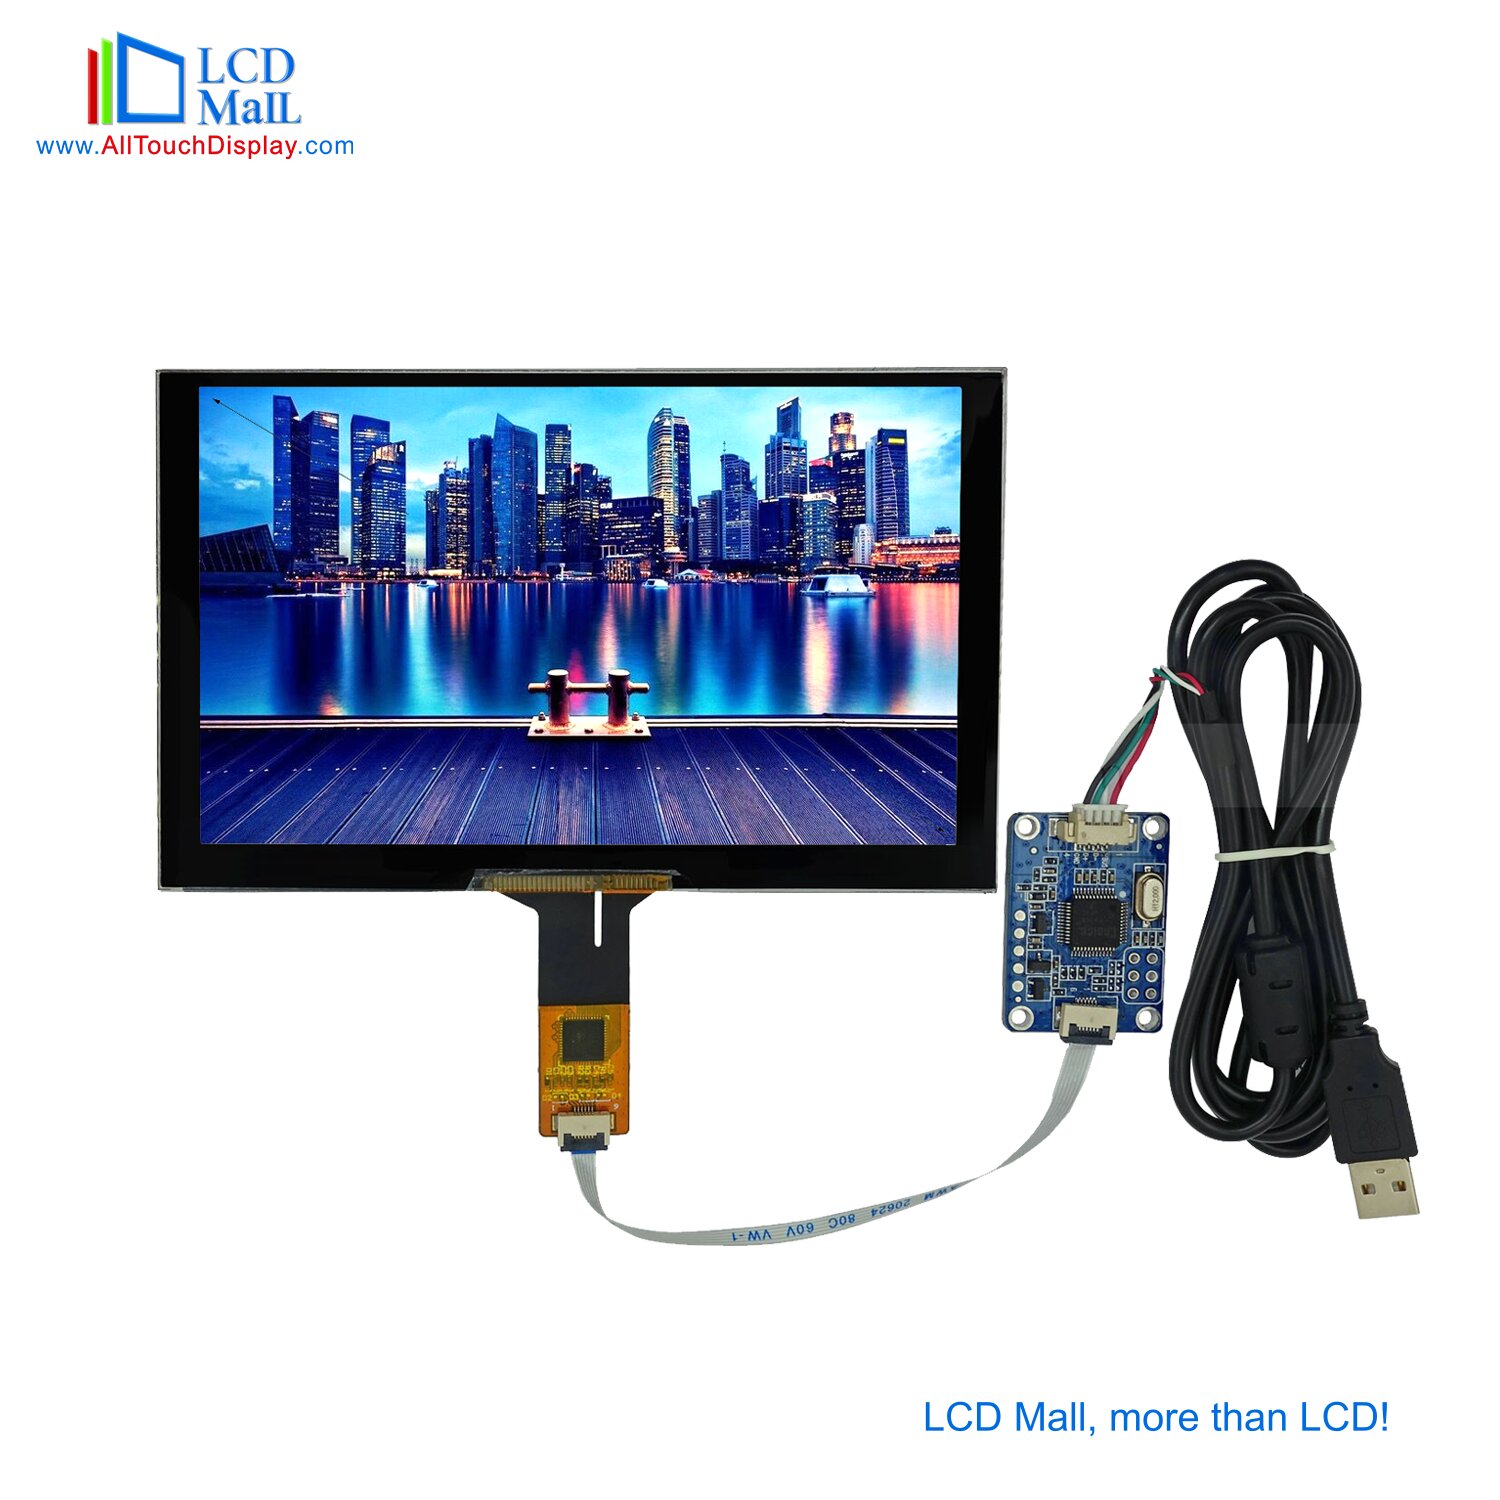 LCD Mall Array image116